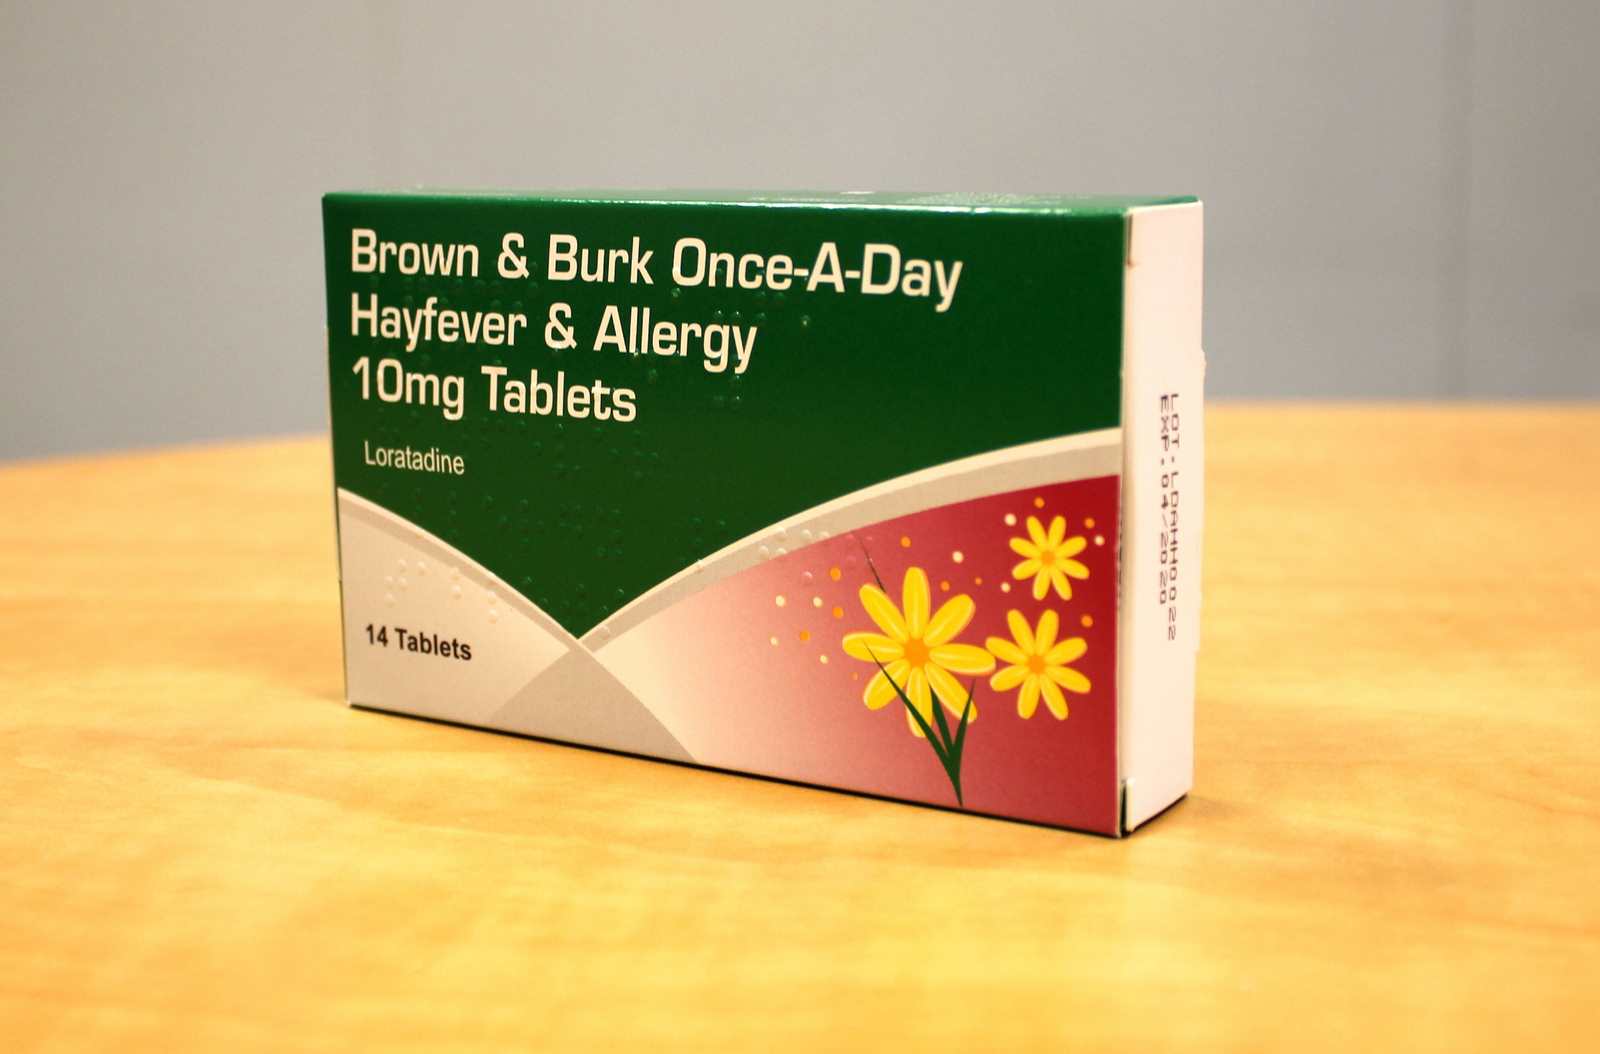 Once -A-Day Hayfever & Allergy 10 mg Tablets - B&B